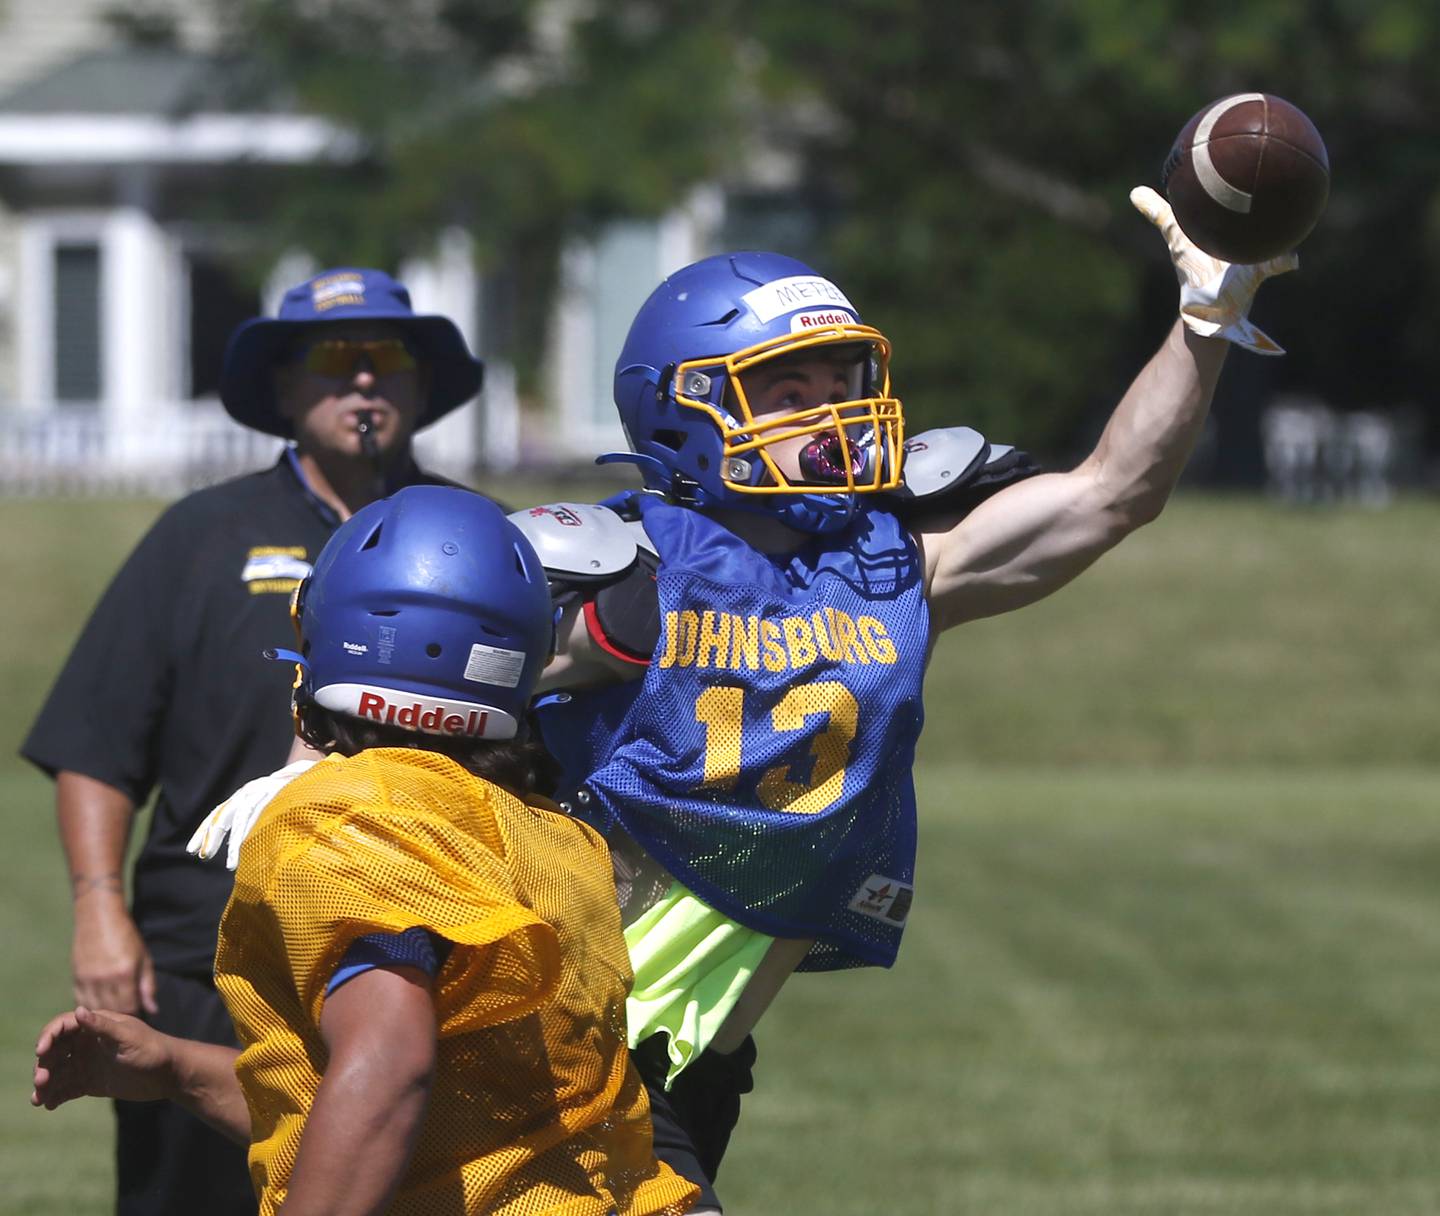 Jake Metze catches the ball during summer football practice Thursday, June 23, 2022, at Johnsburg High School in Johnsburg.